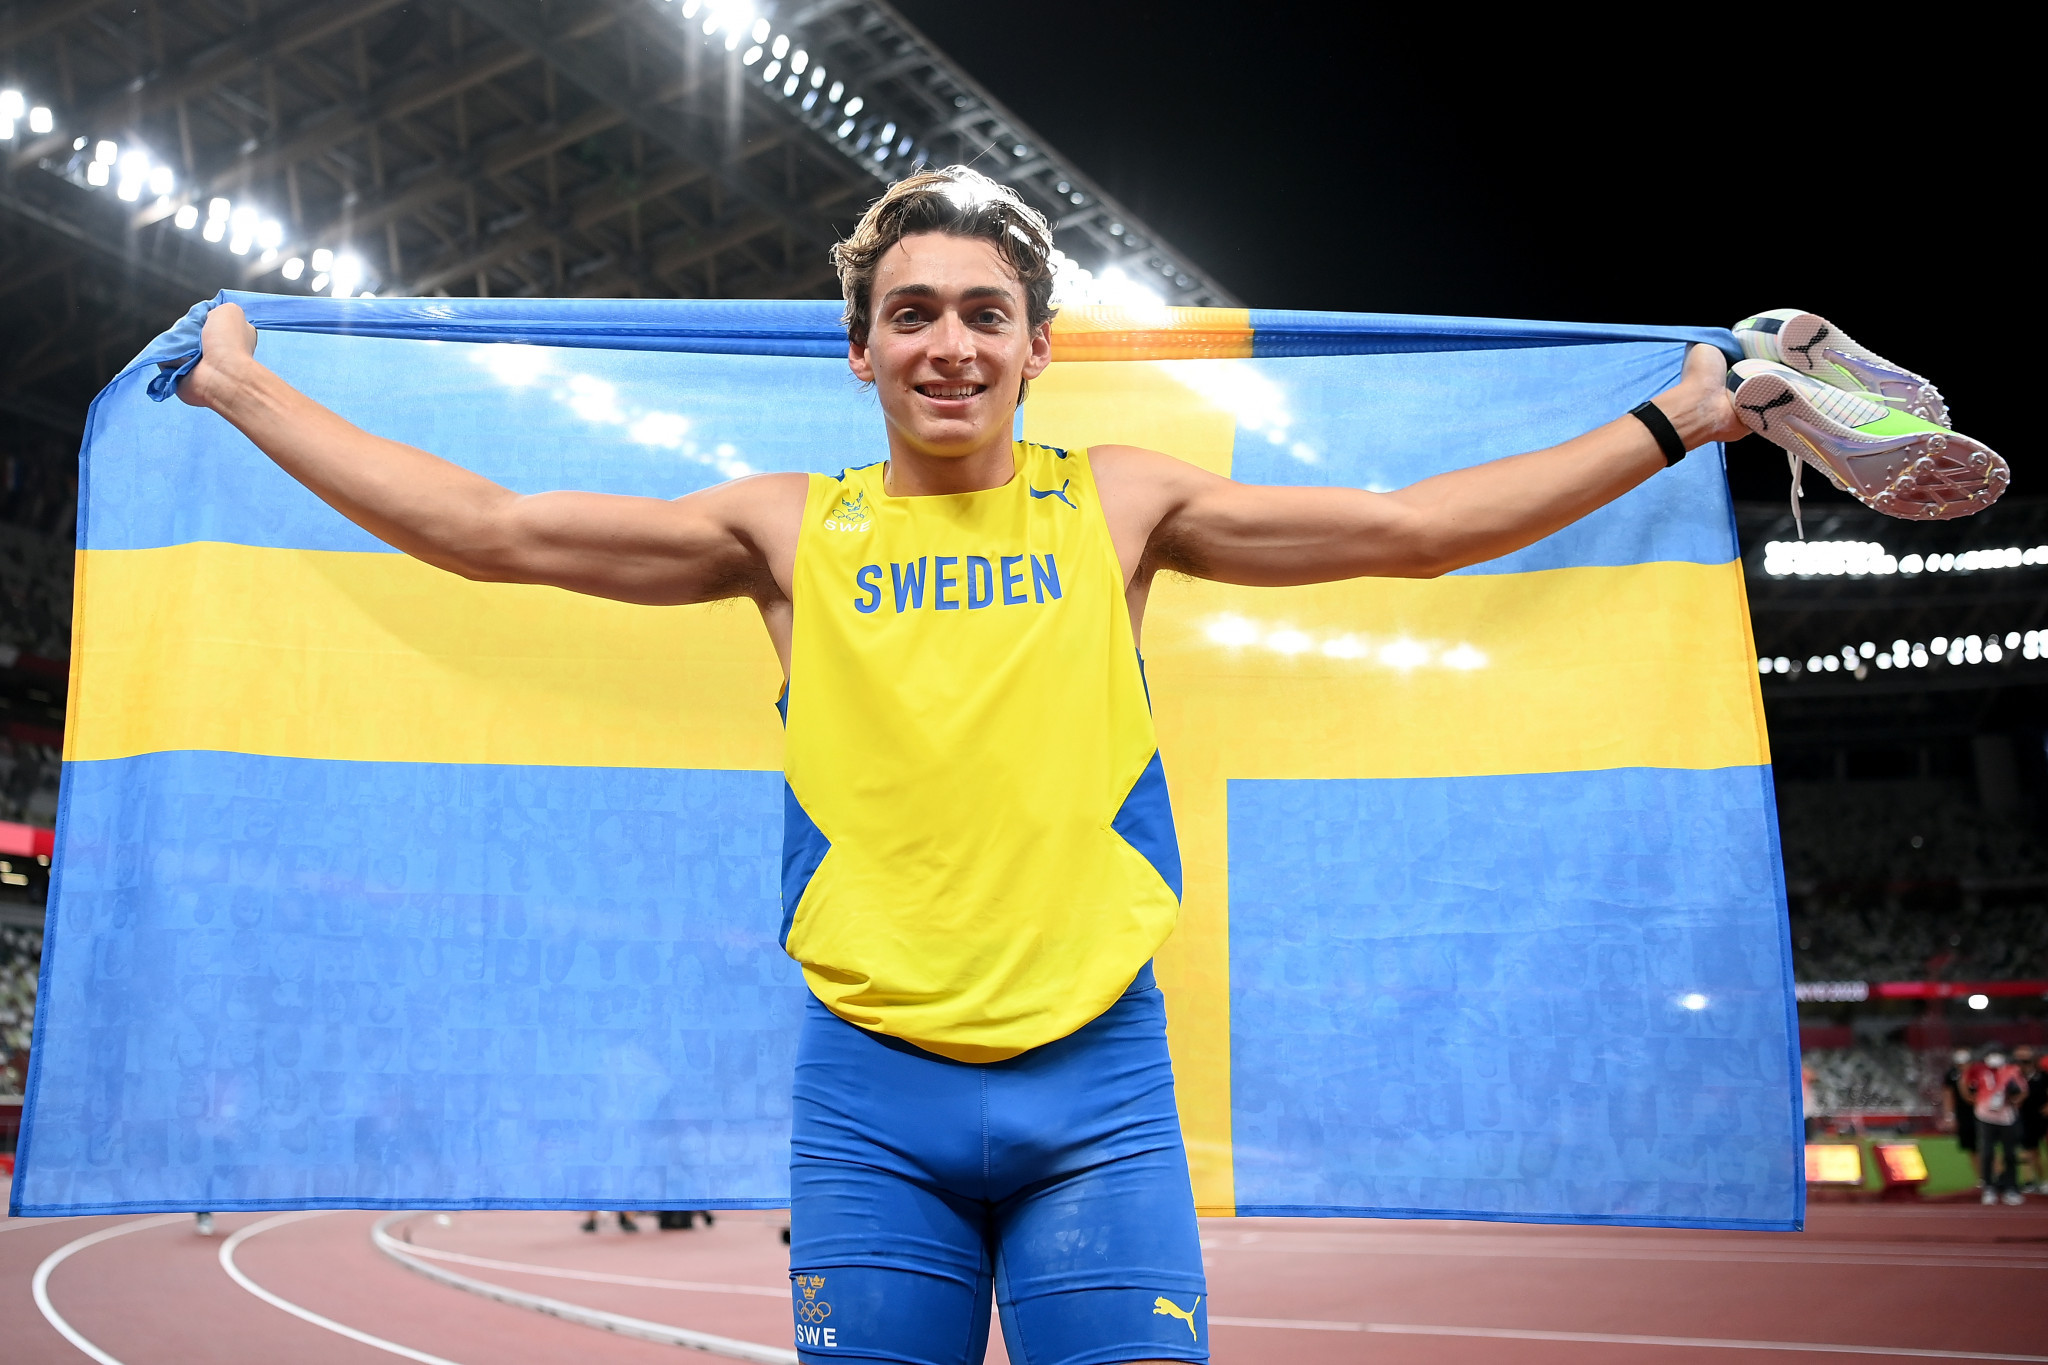 Pole vault world record holder Armand Duplantis won one of three Swedish gold medals at the Tokyo 2020 Olympics ©Getty Images